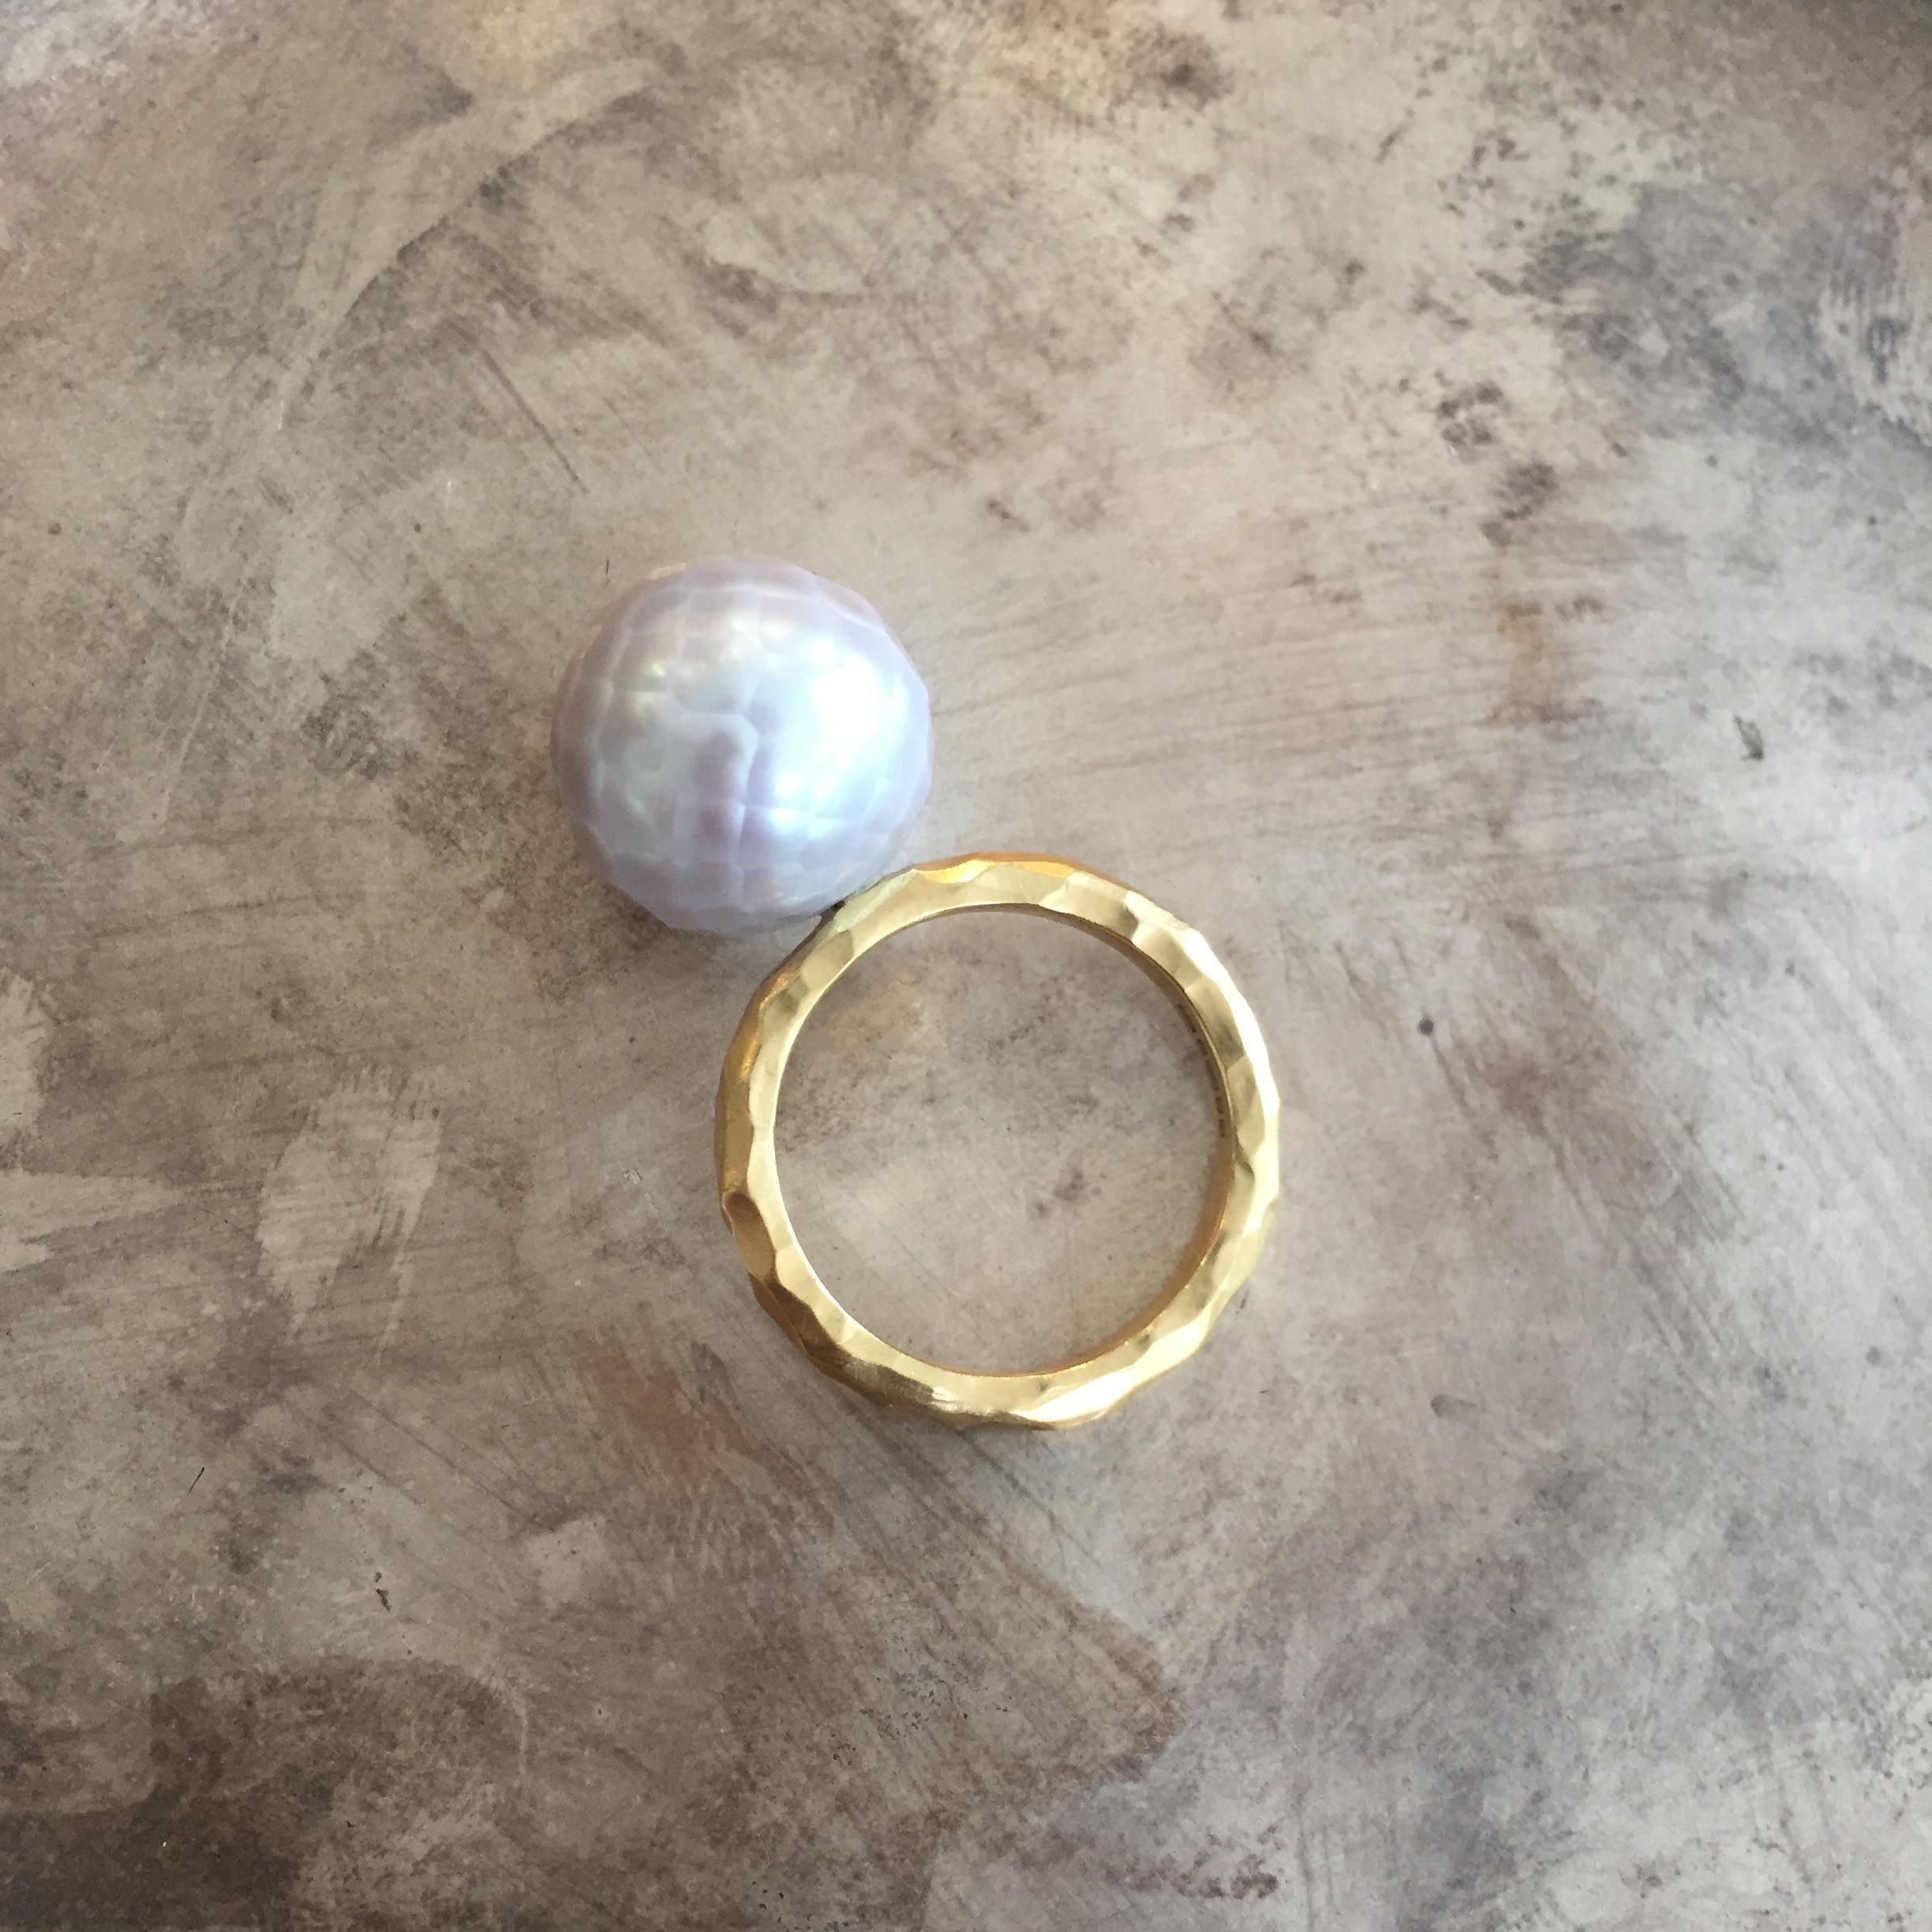 This stunning ring from Sweet Pea features an 18k yellow gold hammered 2.5mm wide band with a brushed finish. The unique faceted pearl is 13mm in diameter and is a soft pink-grey colour. This one-off ring is a UK size L 1/2.